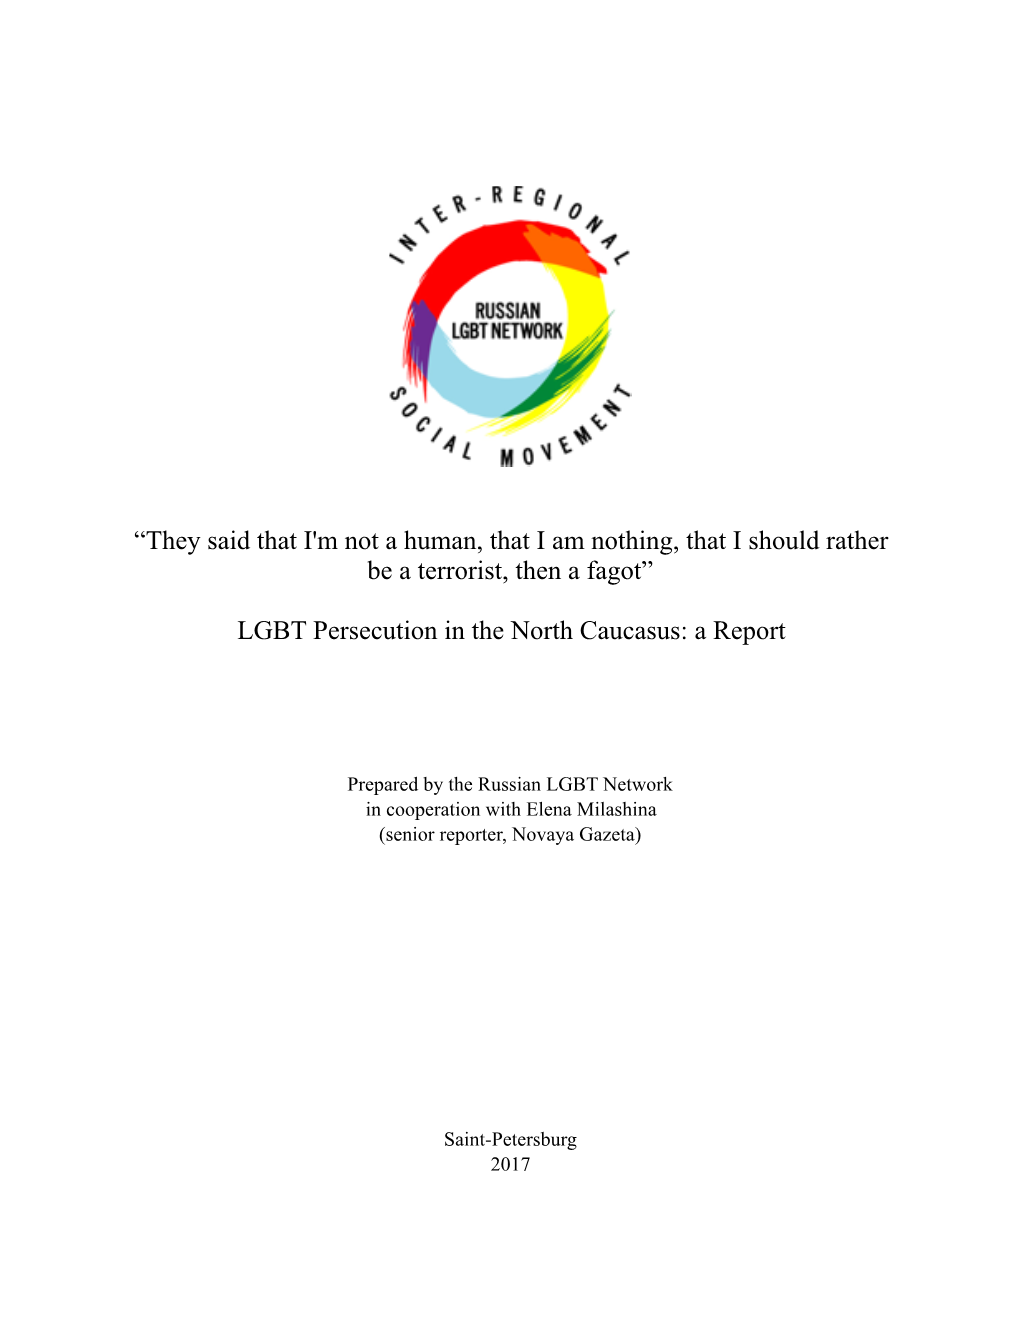 LGBT Persecution in the North Caucasus: a Report